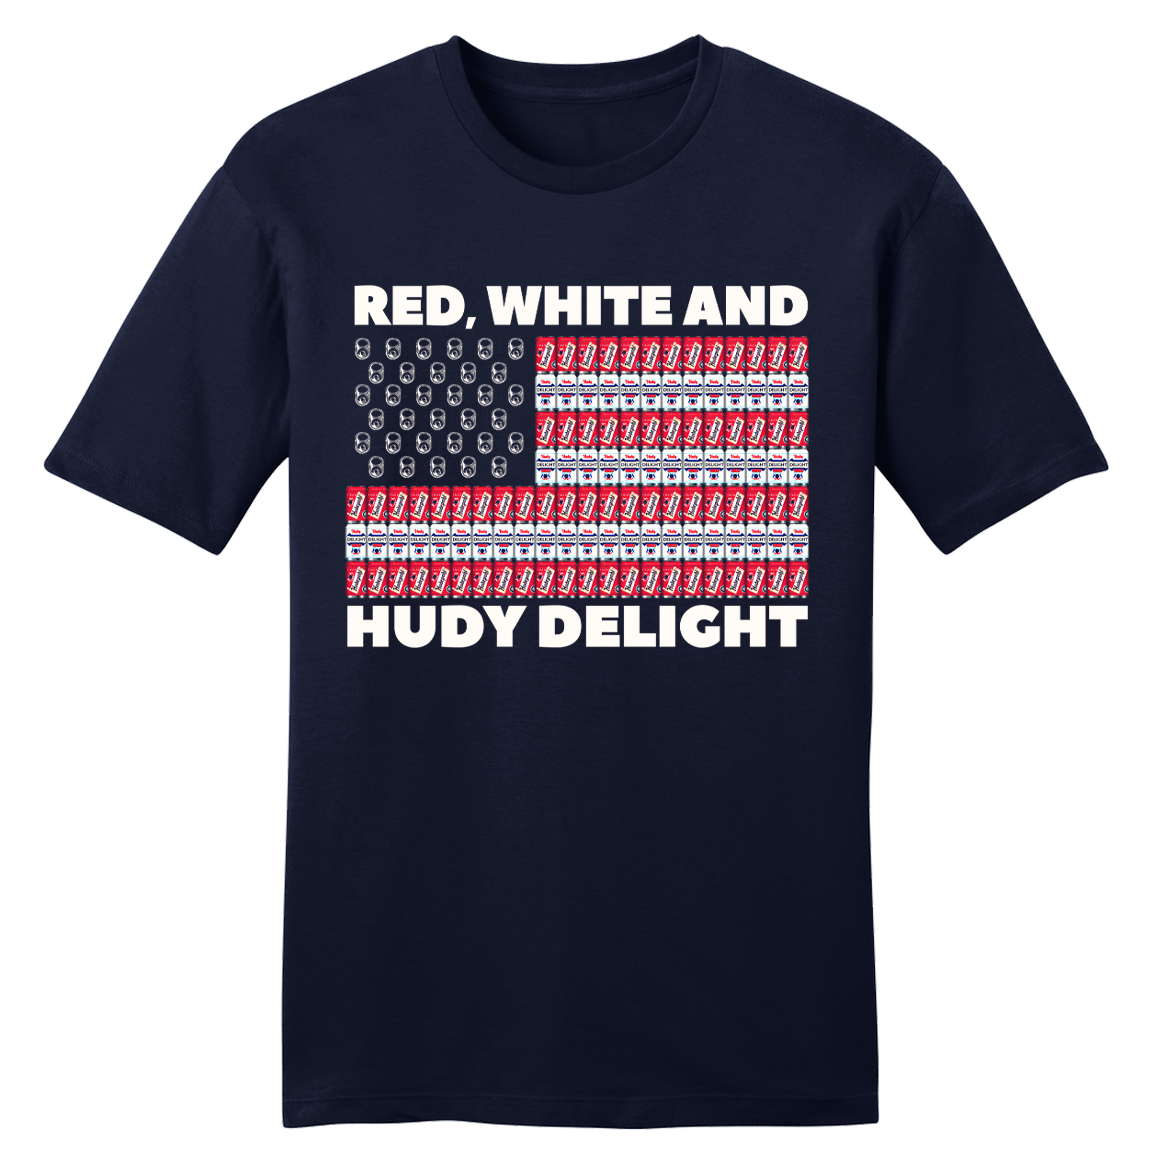 Red, White, and Hudy Delight - Cincy Shirts